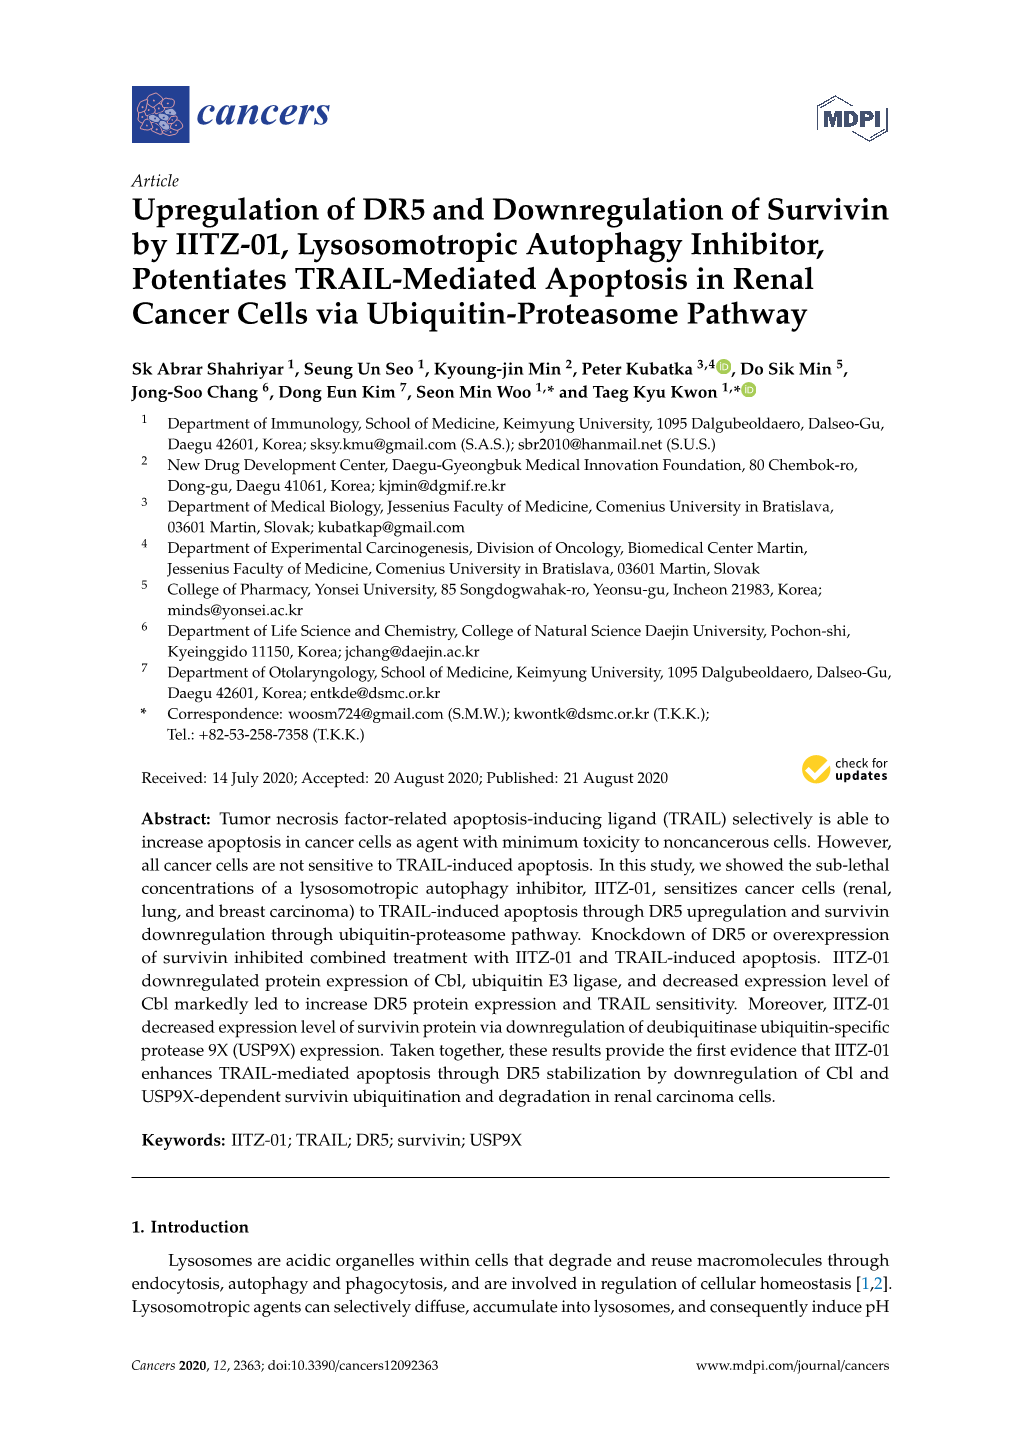 Upregulation of DR5 and Downregulation of Survivin by IITZ